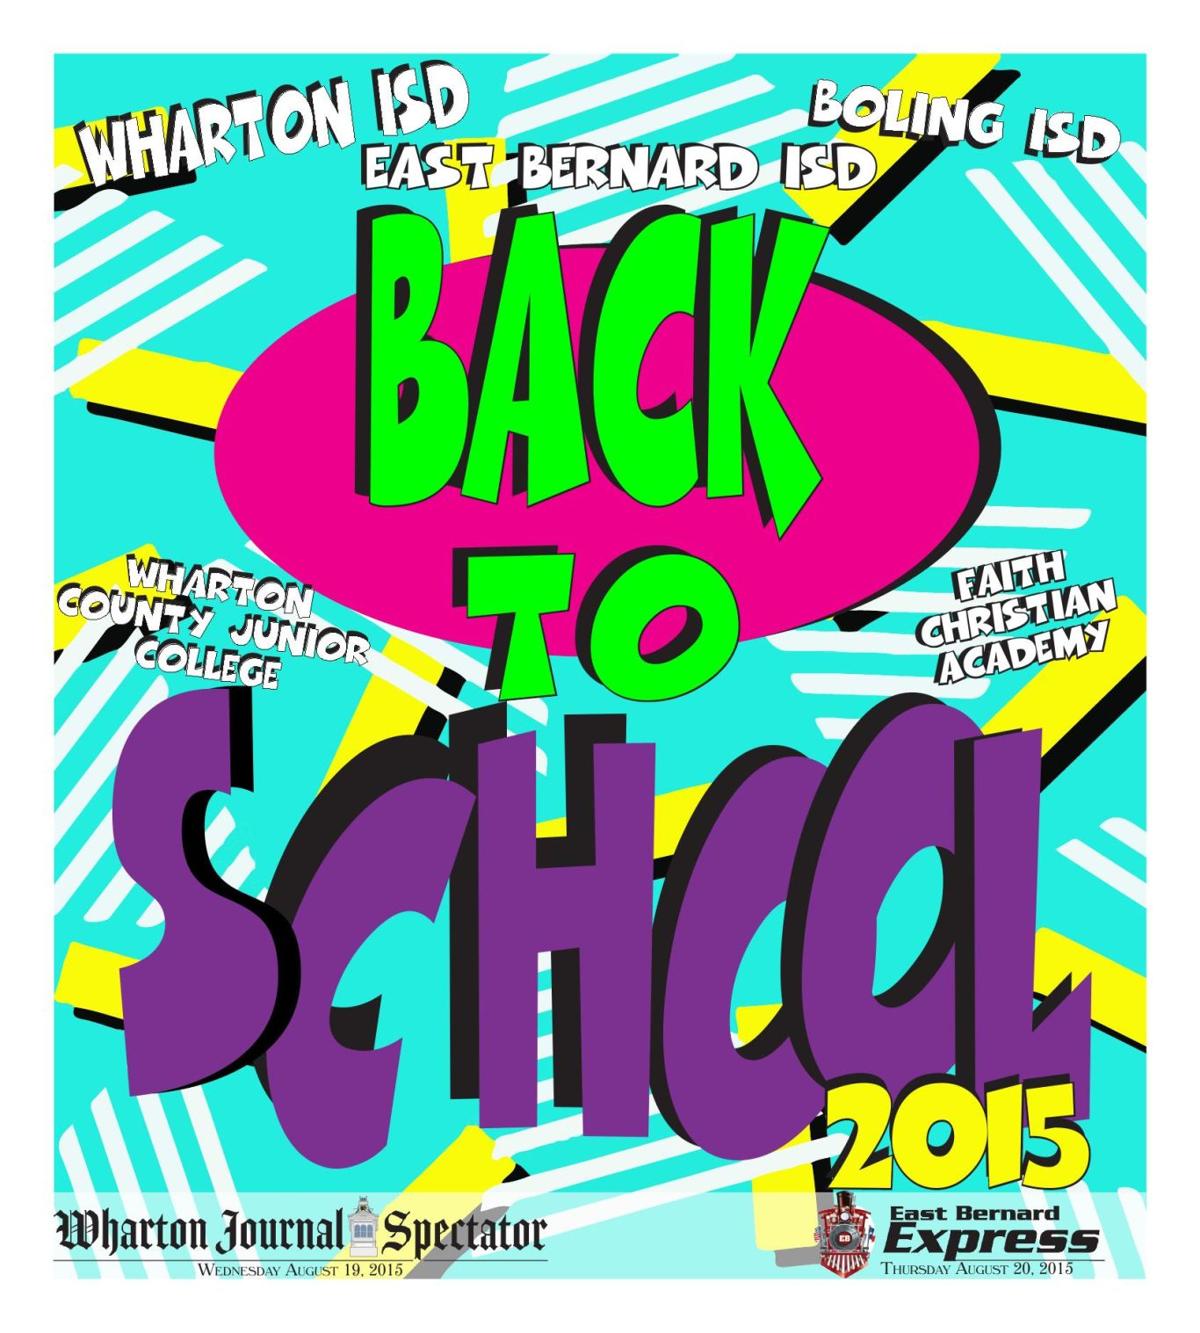 2015 Back to School